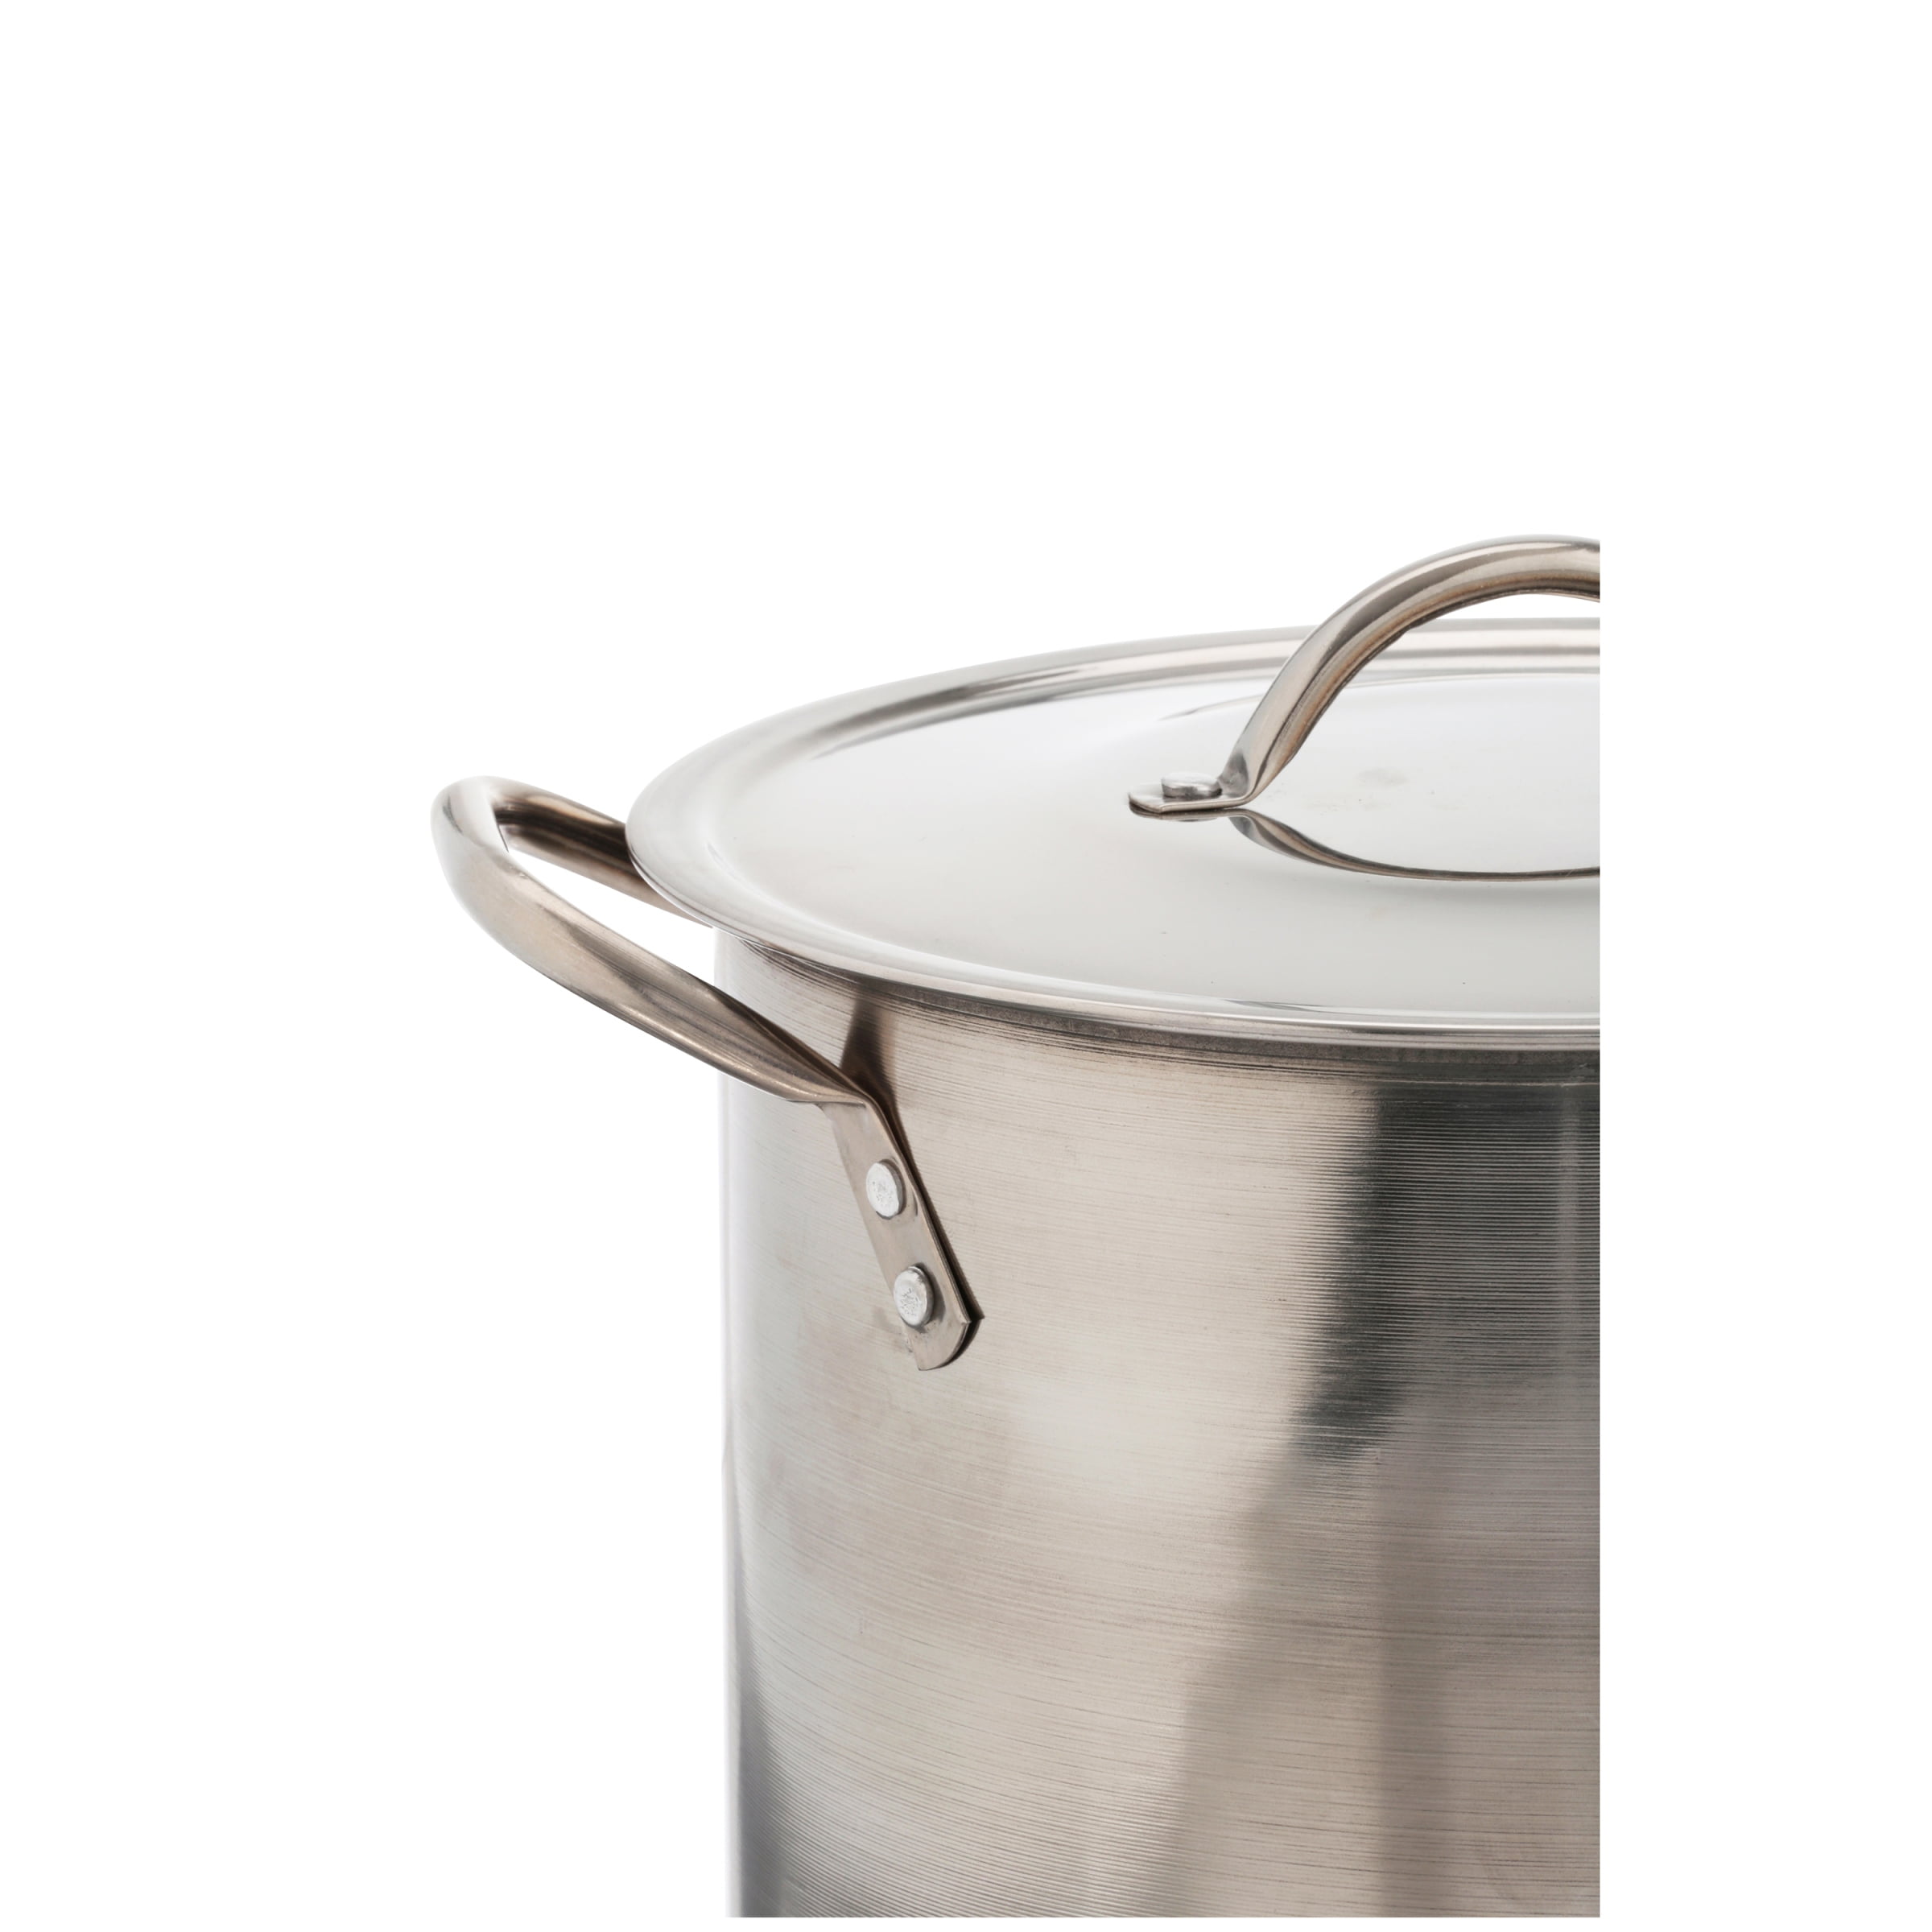 Affordable Cooking Pots & Stock Pots with Lids - IKEA